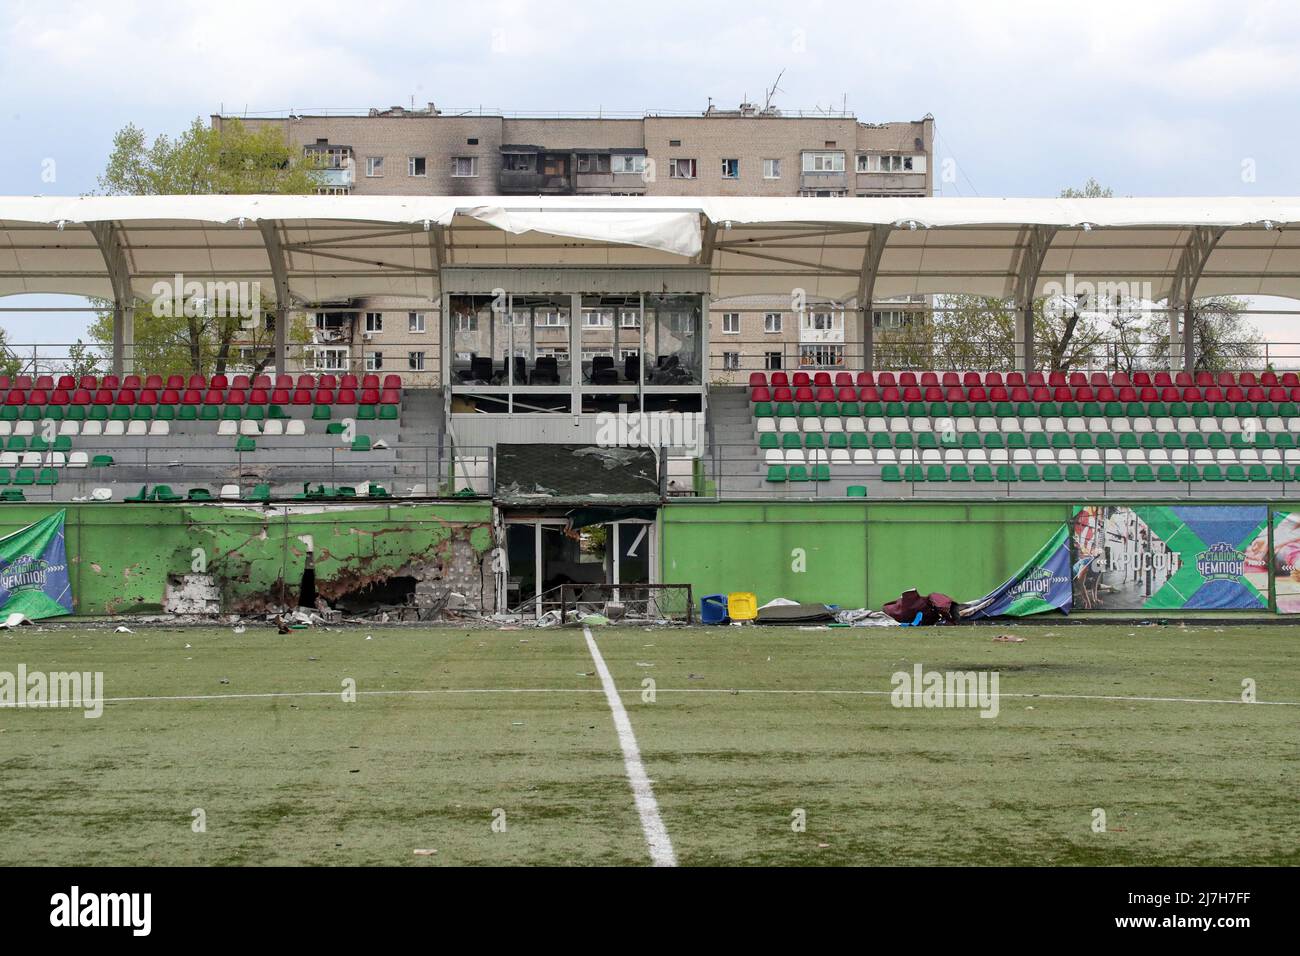 IRPIN, UKRAINE - MAY 8, 2022 - The Chempion Stadium damaged as a result of Russian shelling is pictured in Irpin, Kyiv Region, northern Ukraine. This Stock Photo